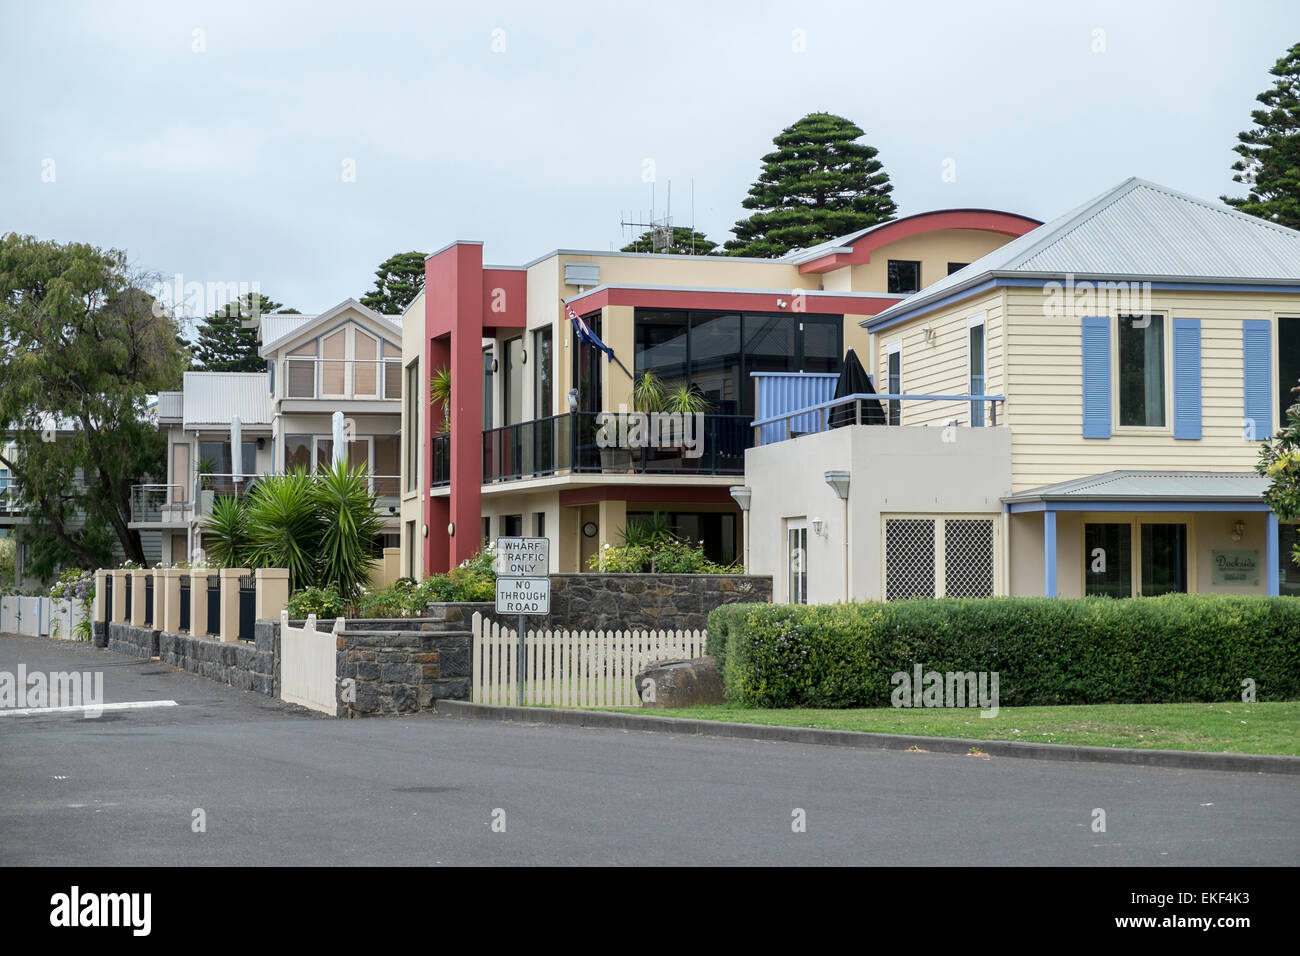 Cottages and homes in the village of Port Fairy on the Moyne River, Victoria Australia Stock Photo